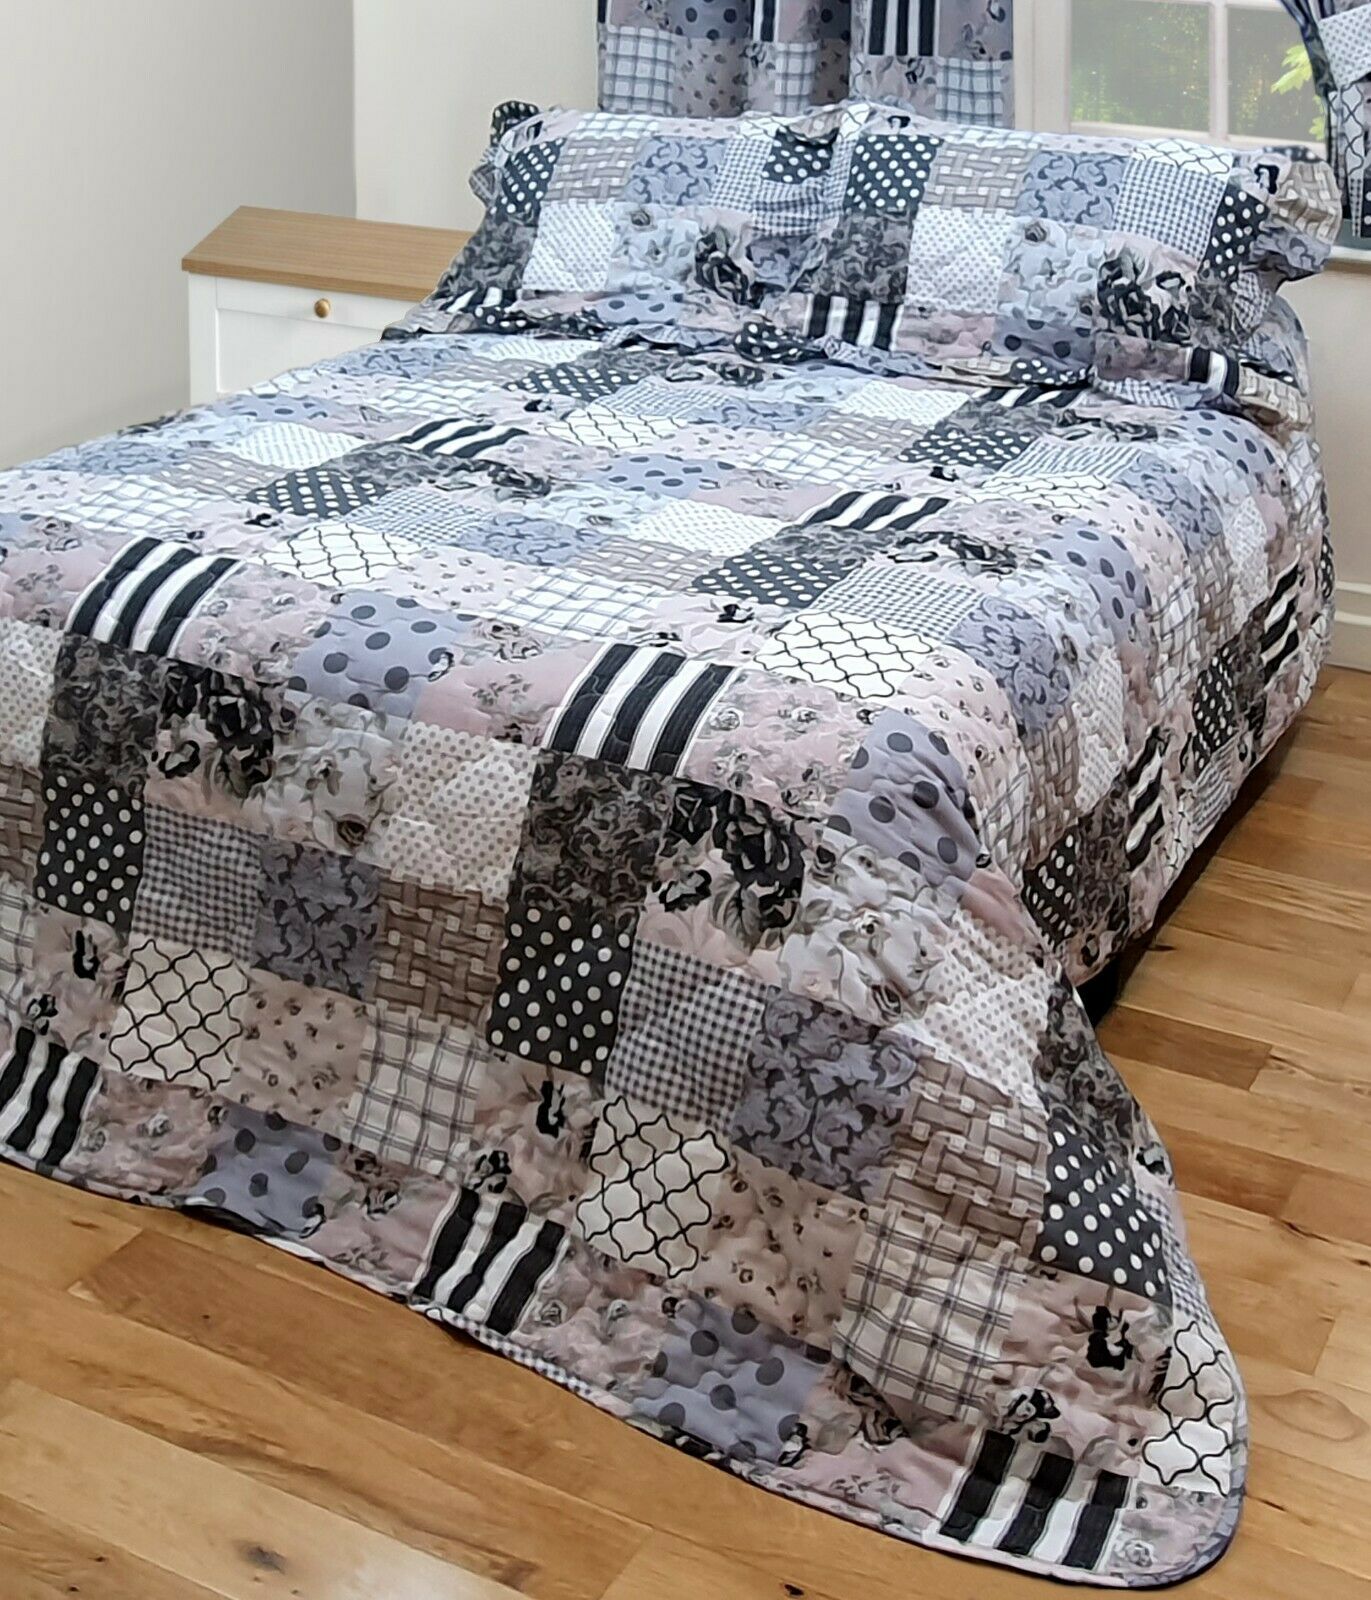 Double Bed Patchwork Grey Black Quilted Bedspread Set Pillowshams